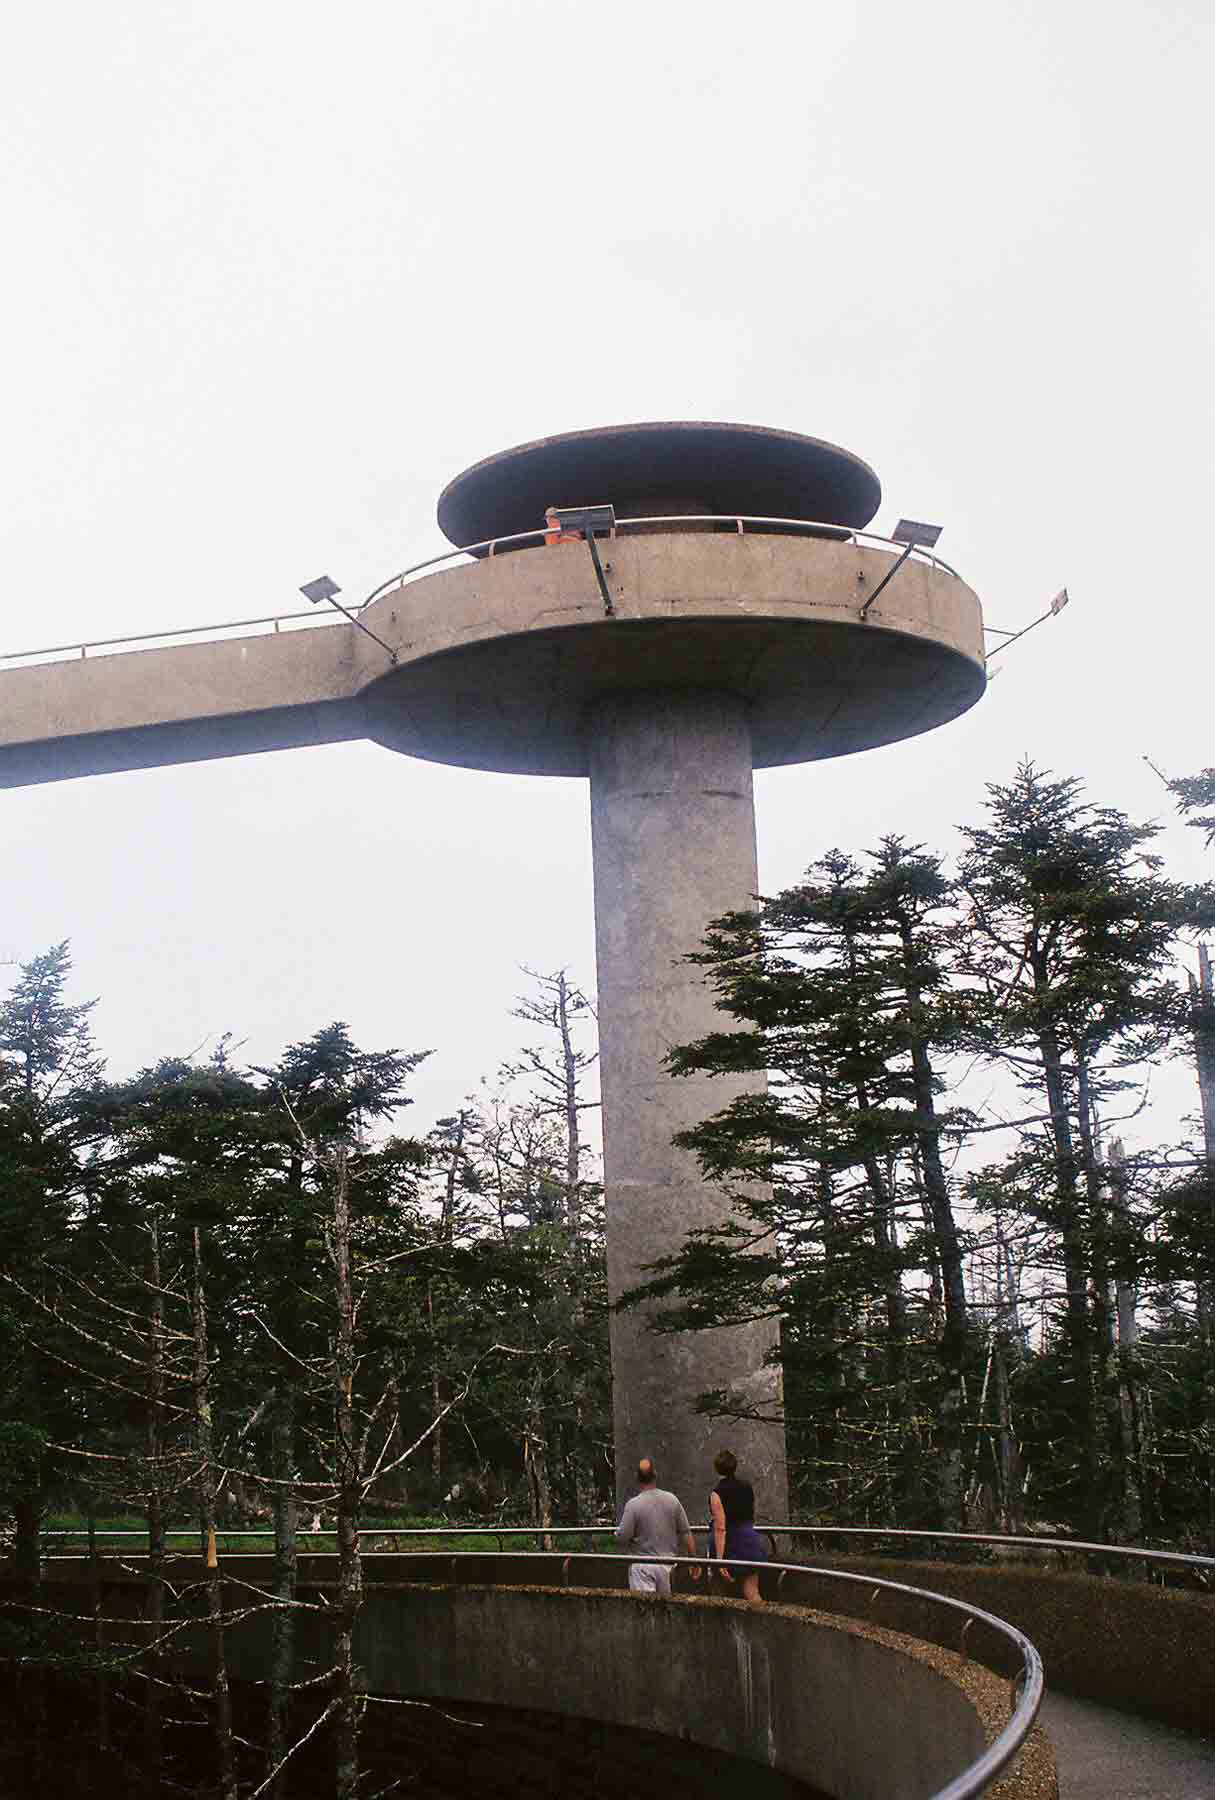 mm 7.9 - Observation tower on Clingmans Dome. The trail passes just to west of it. At this point, the trail reaches its highest elevation along the whole 2180+ mile route. Courtesy dlcul@conncoll.edu